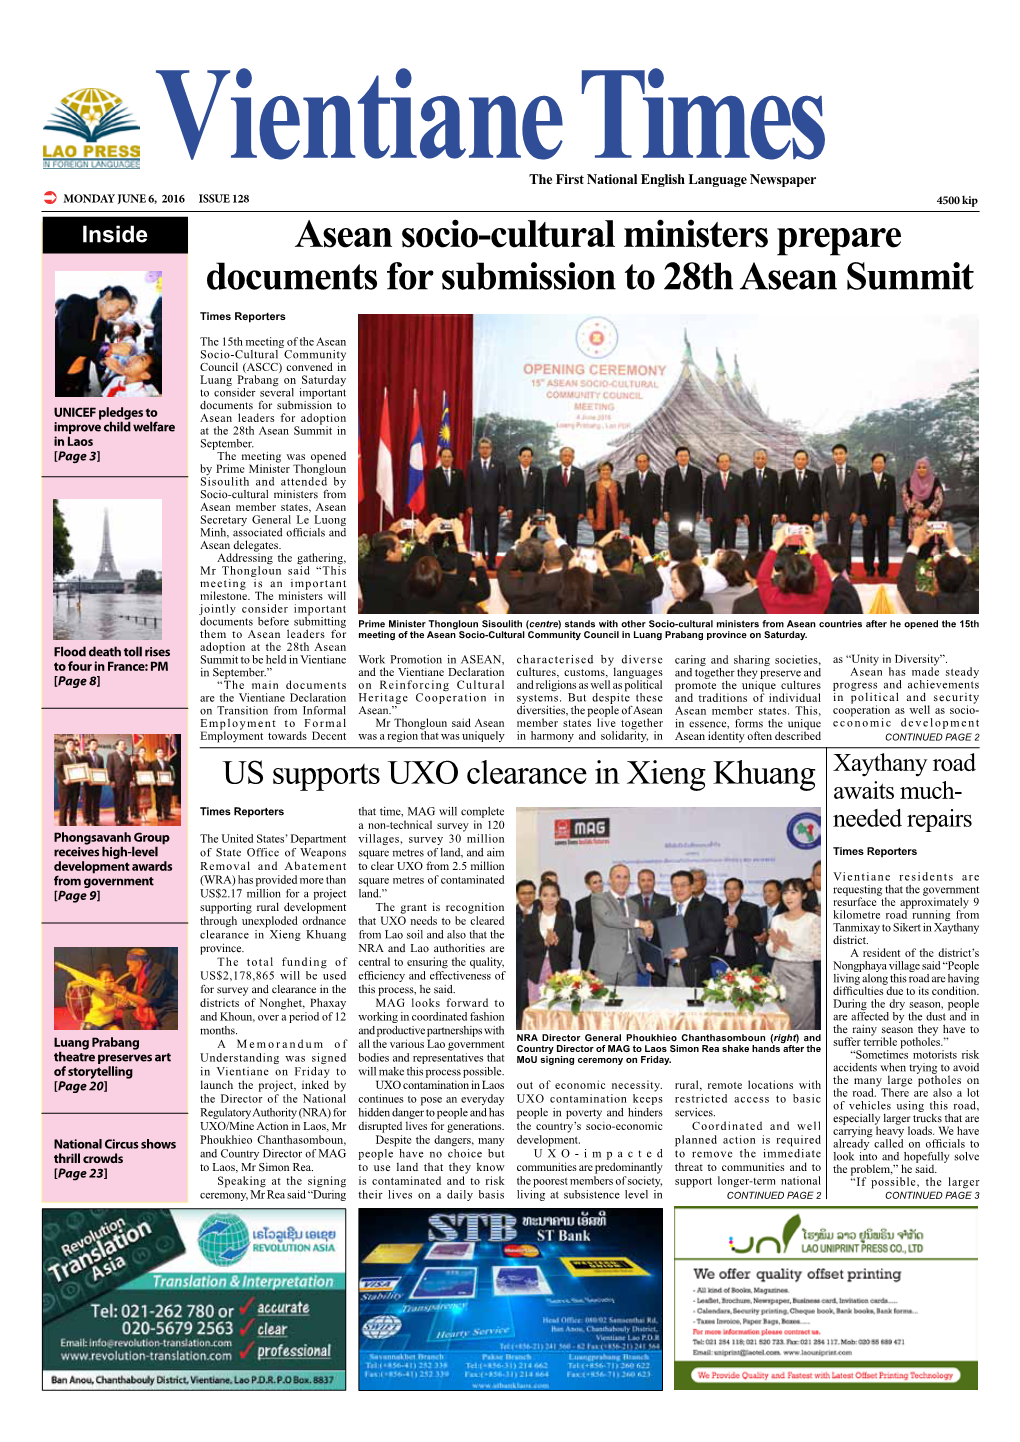 Asean Socio-Cultural Ministers Prepare Documents for Submission to 28Th Asean Summit